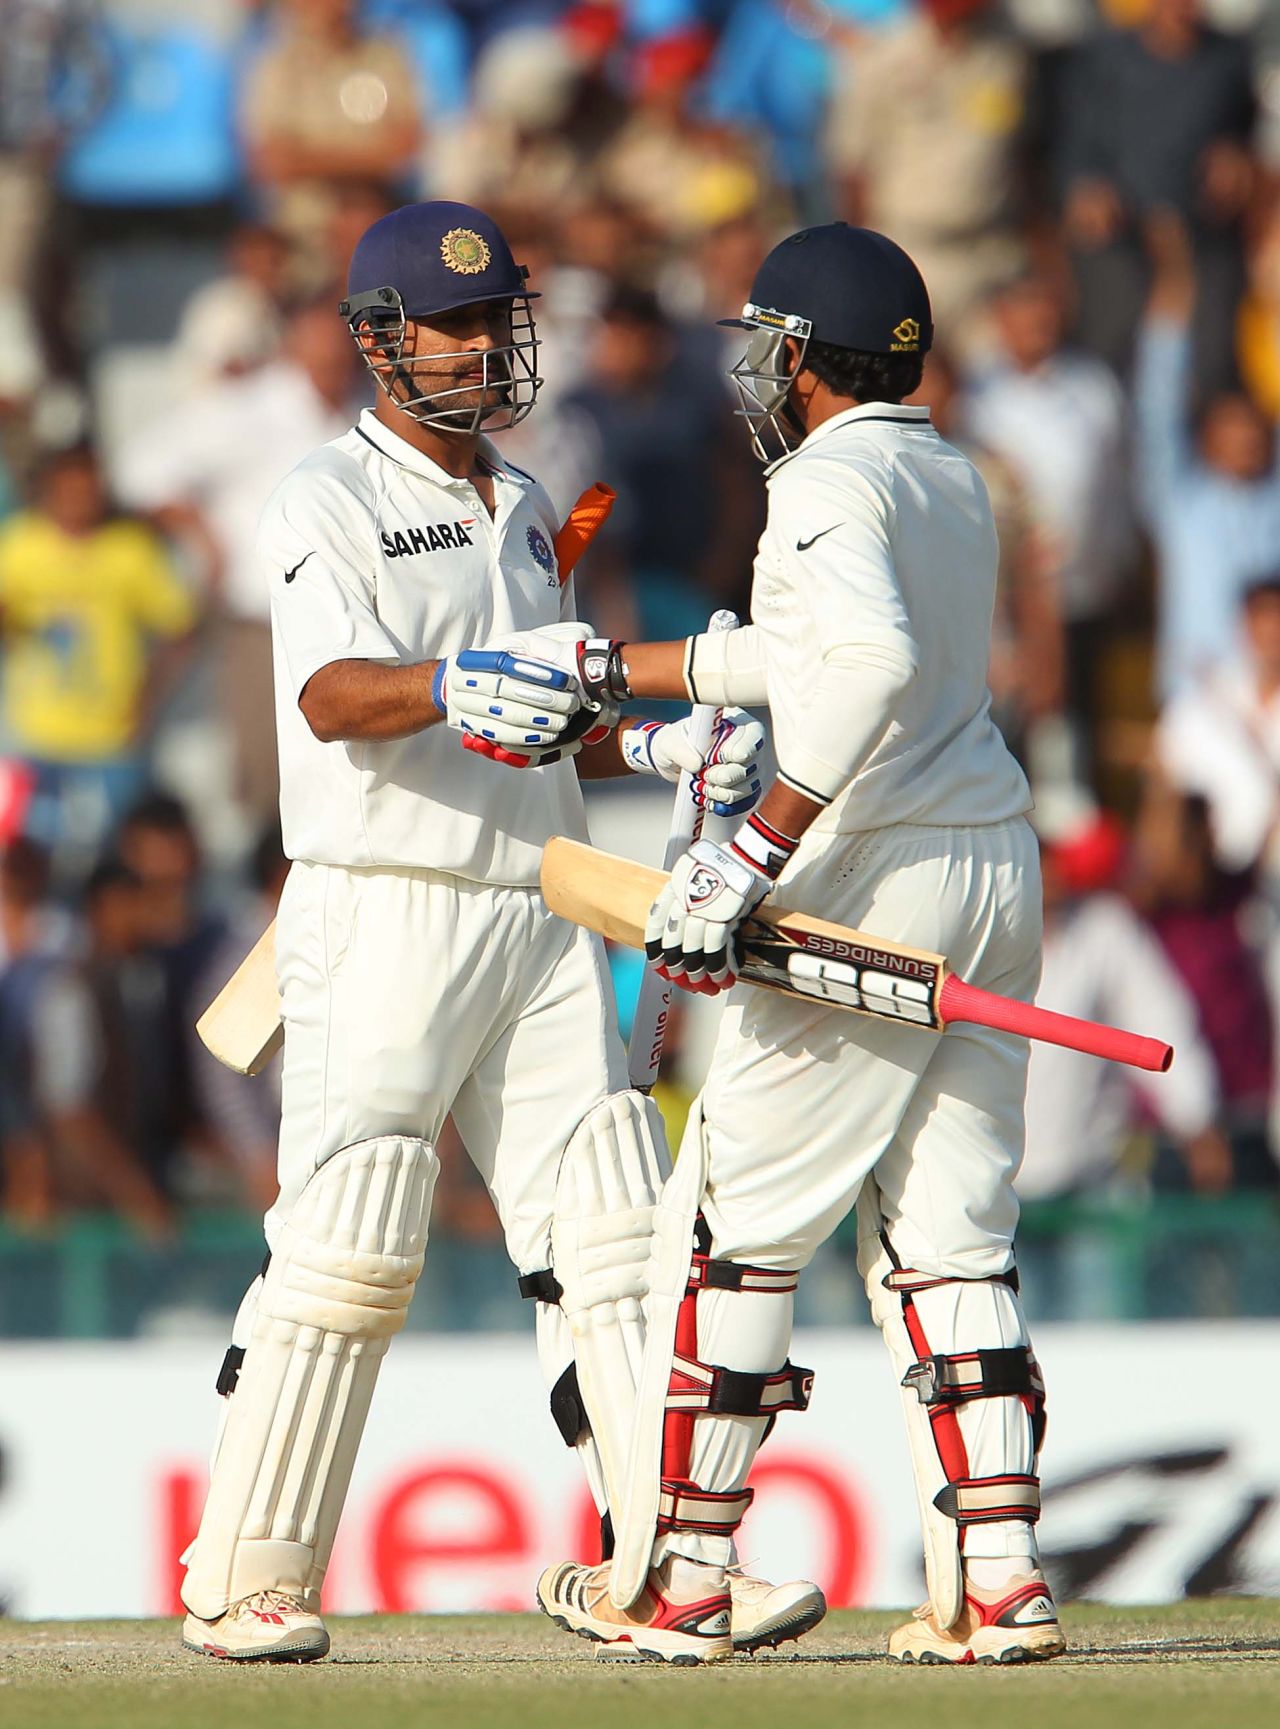 MS Dhoni and Ravindra Jadeja congratulate one another on steering India home to victory, India v Australia, 3rd Test, Mohali, 5th day, March 18, 2013